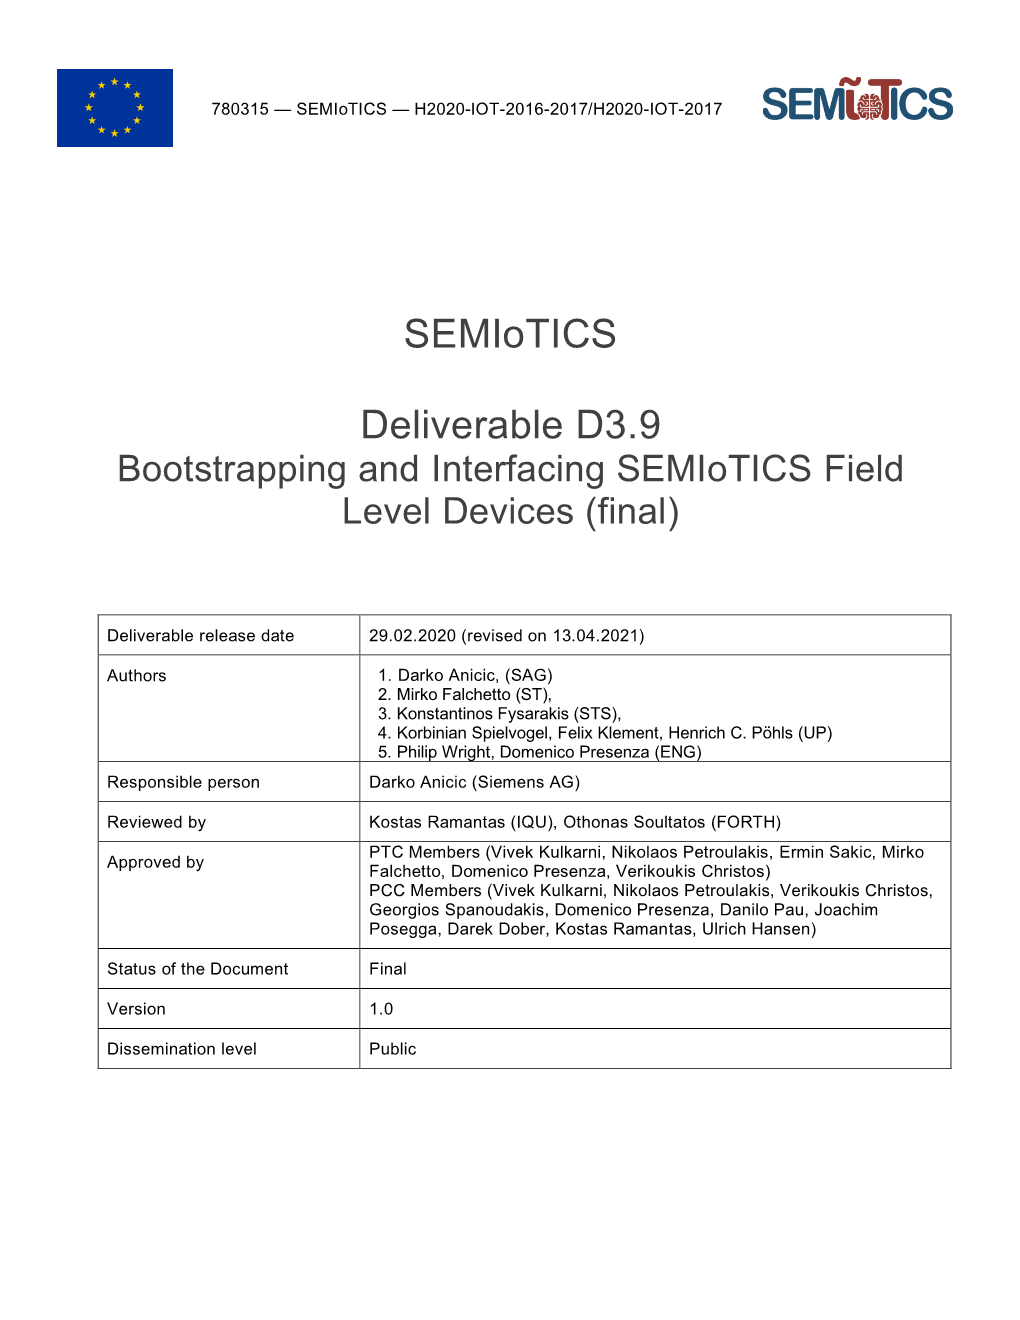 Deliverable D3.9 Bootstrapping and Interfacing Semiotics Field Level Devices (Final)